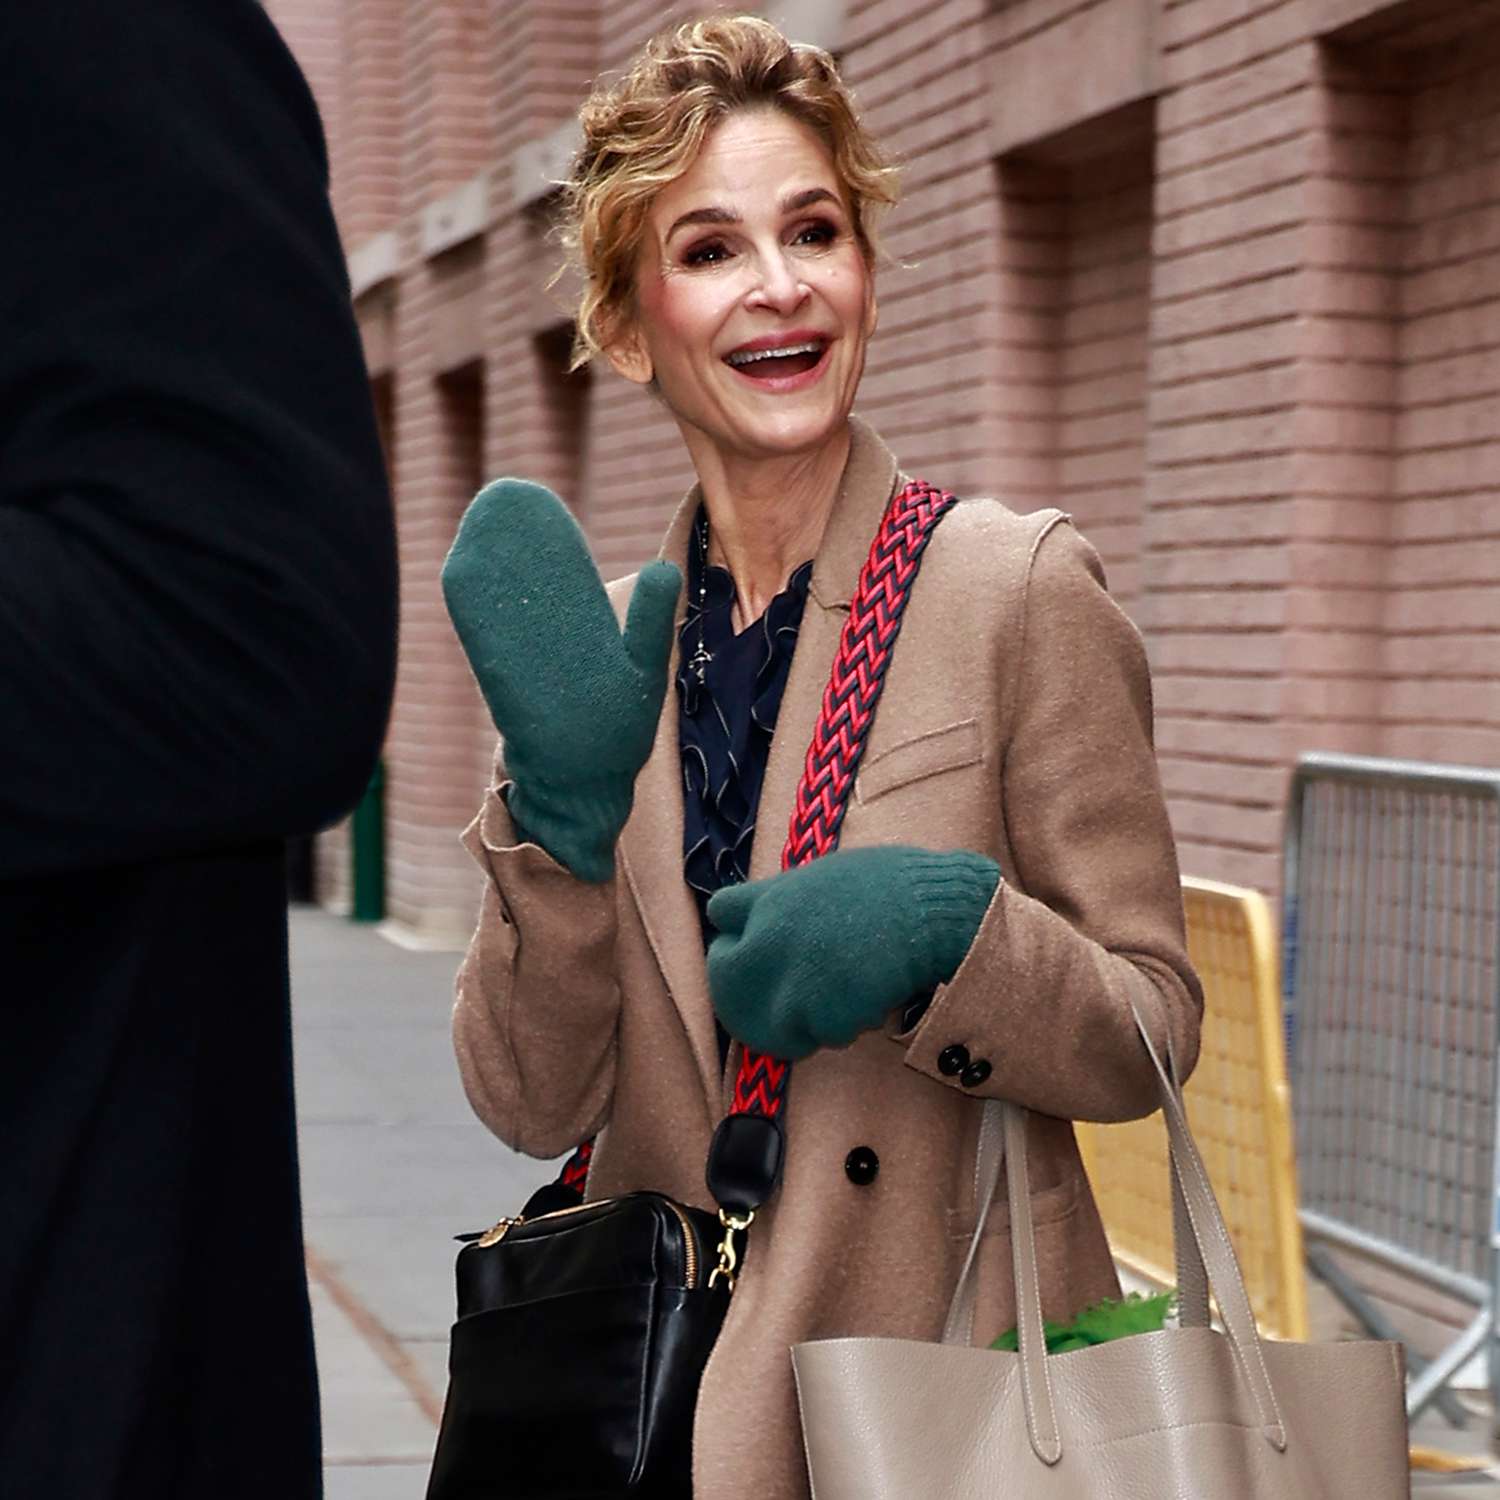 Kyra Sedgwick exits The View Talk Show Studios in New York City. The 58 year old American actress wore a beige jacket, black blouse, baggy trousers, and white trainers.